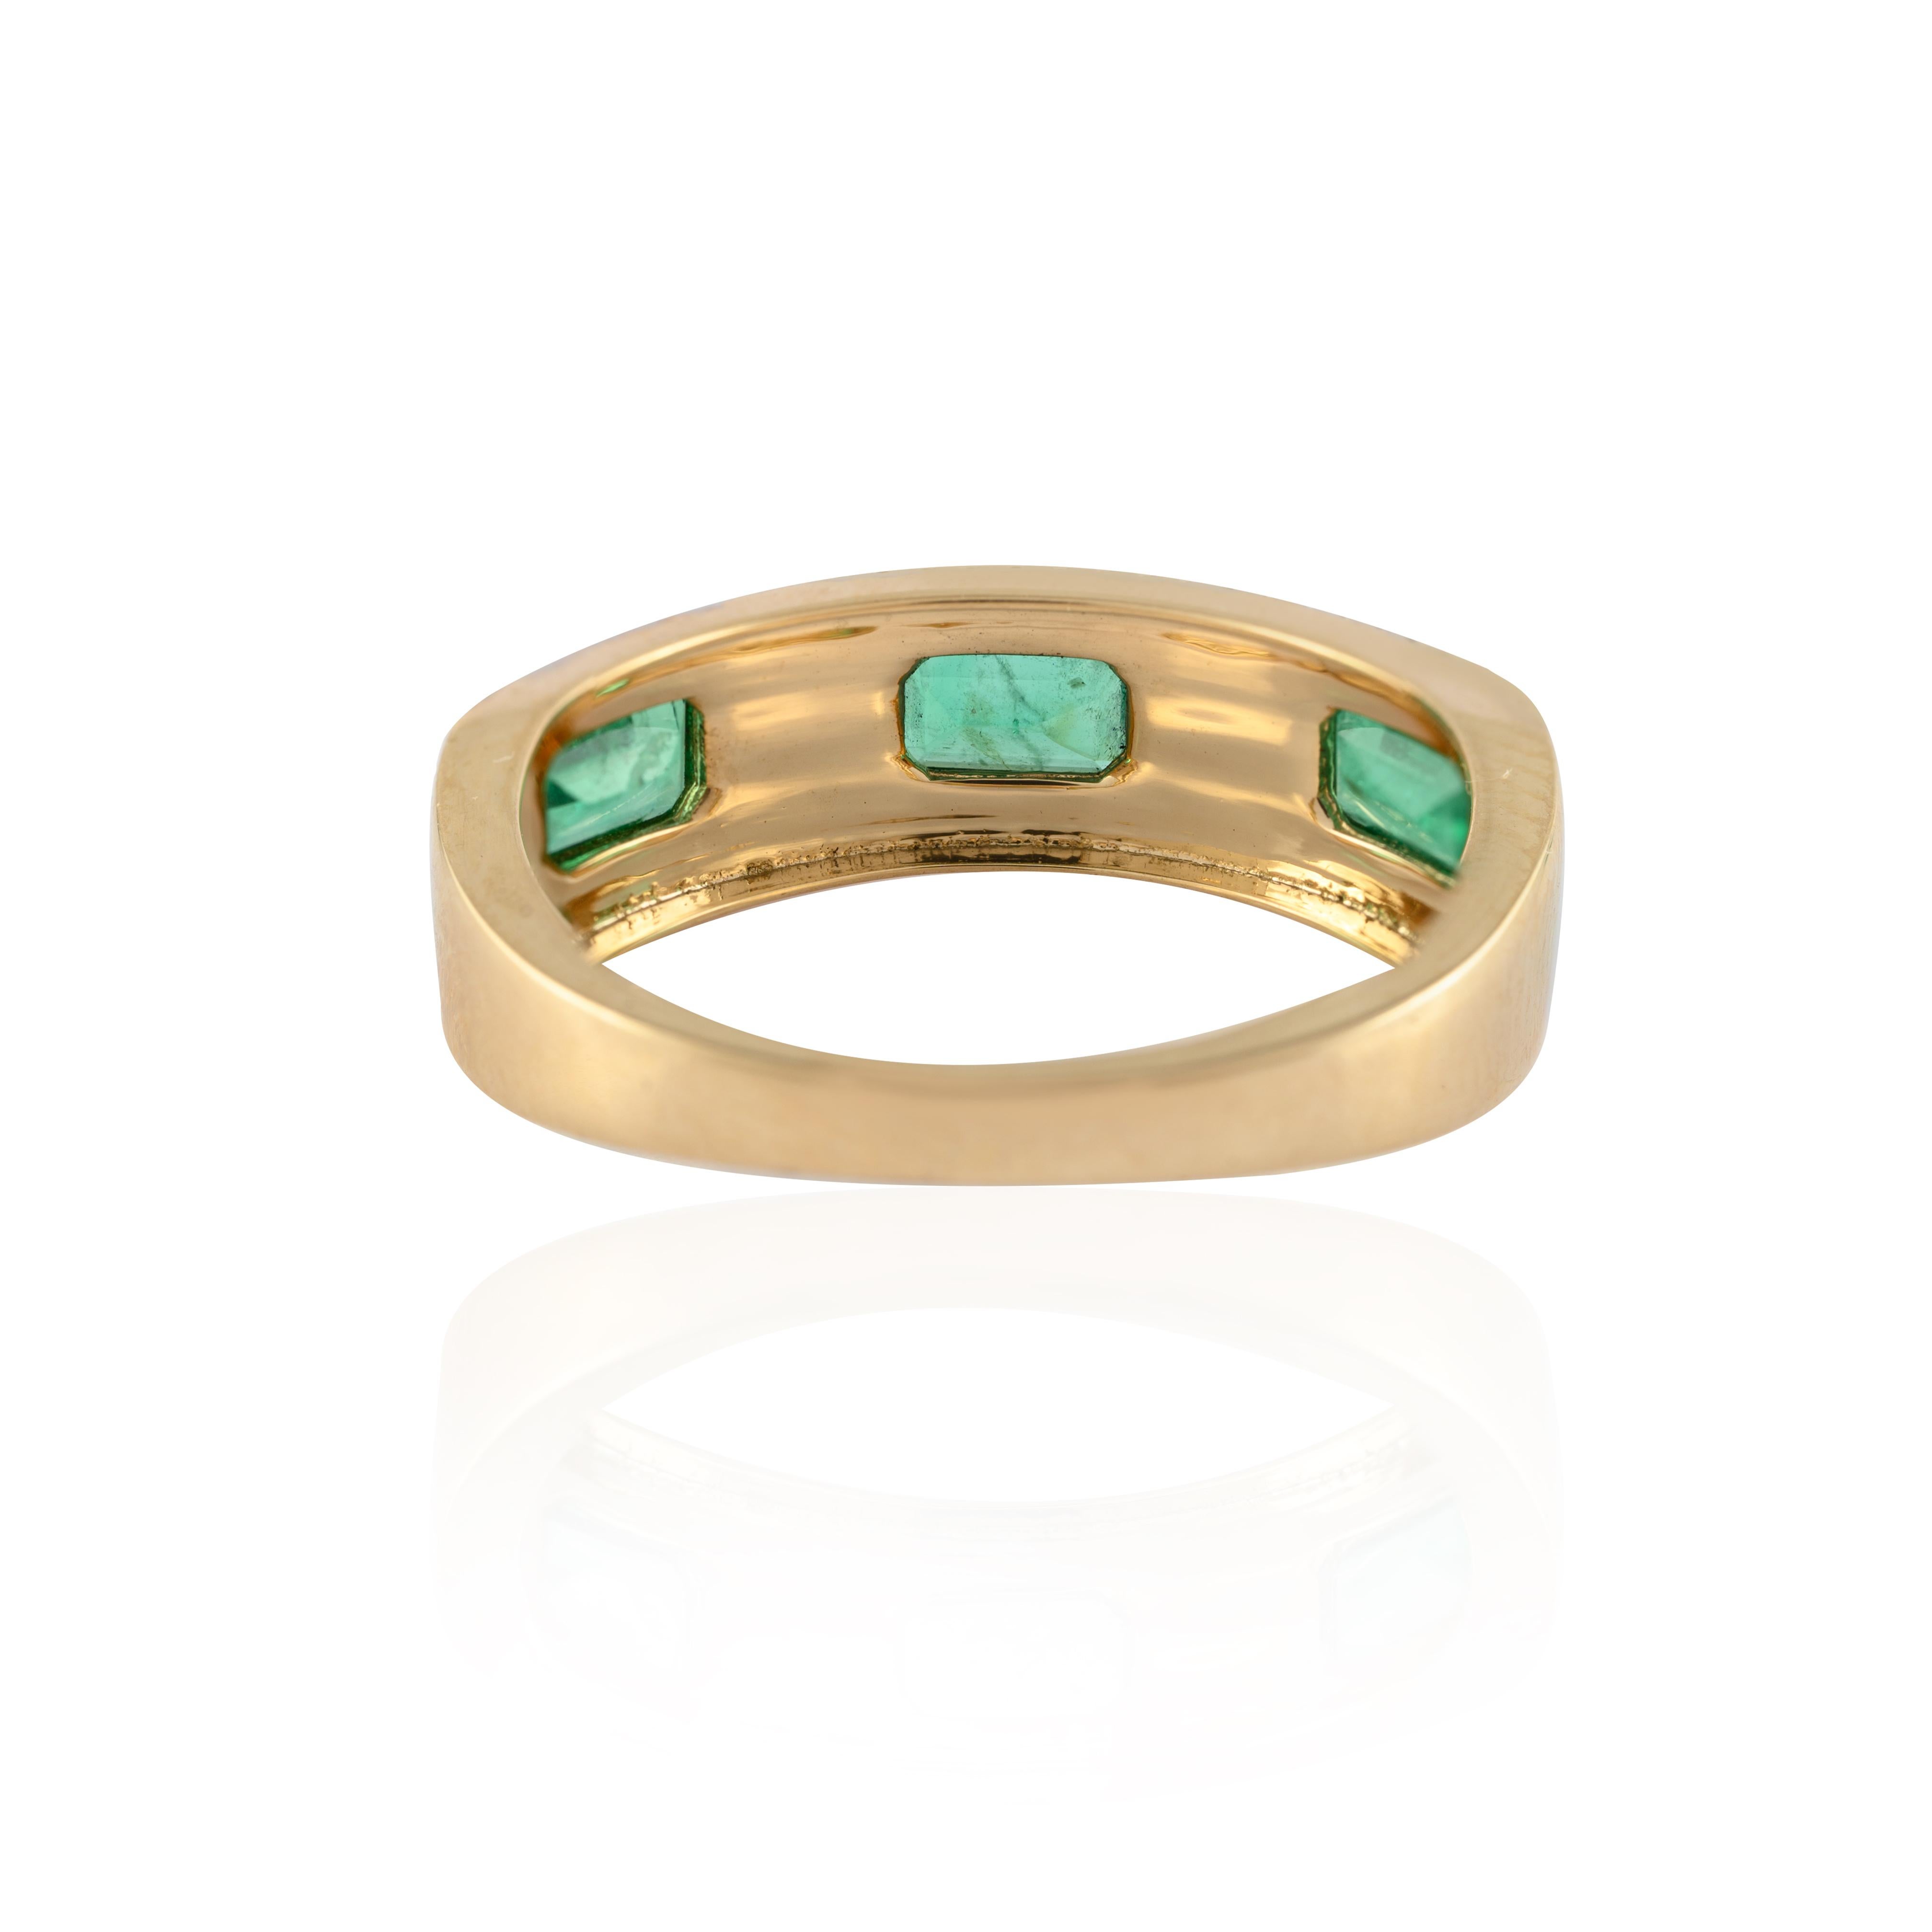 For Sale:  Impeccable Three Stone Emerald and Diamond Engagement Ring in 14k Yellow Gold 4